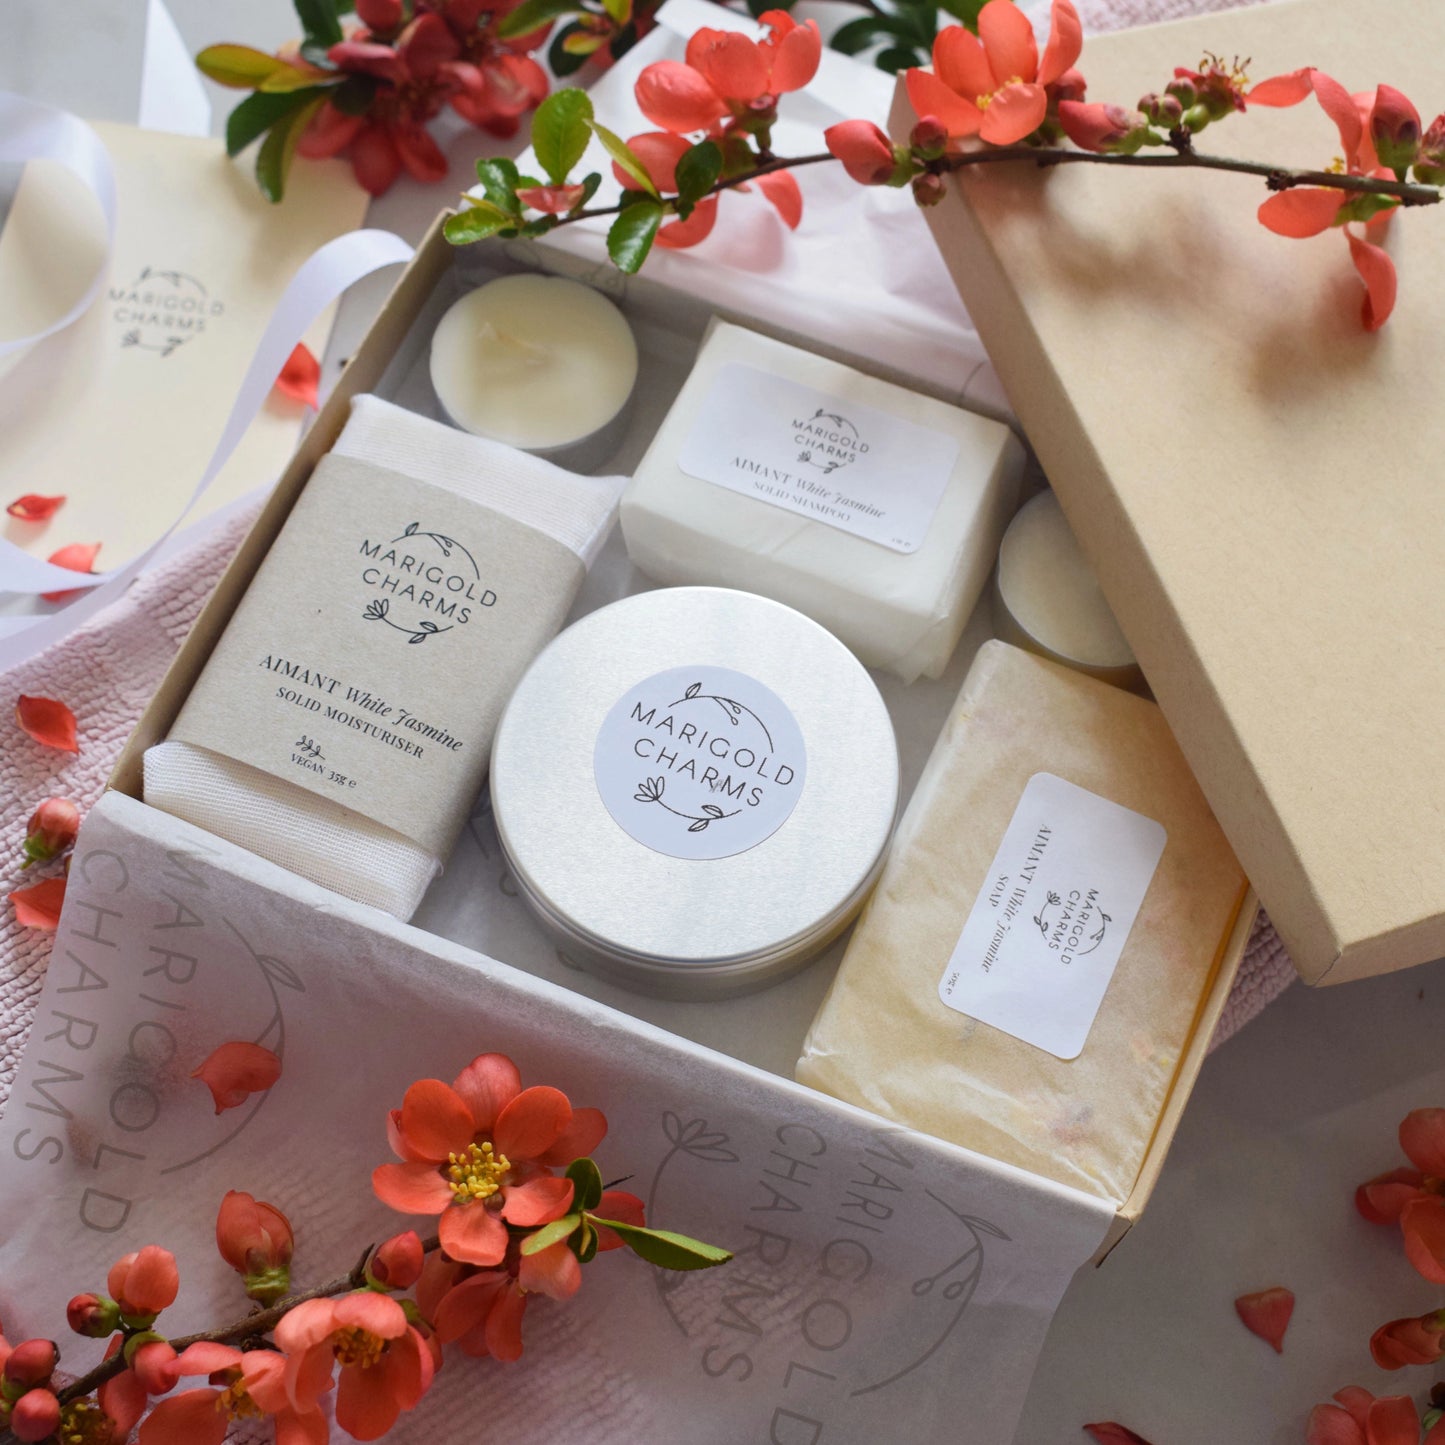 Organic Letterbox Shower Spa Gift Colllection